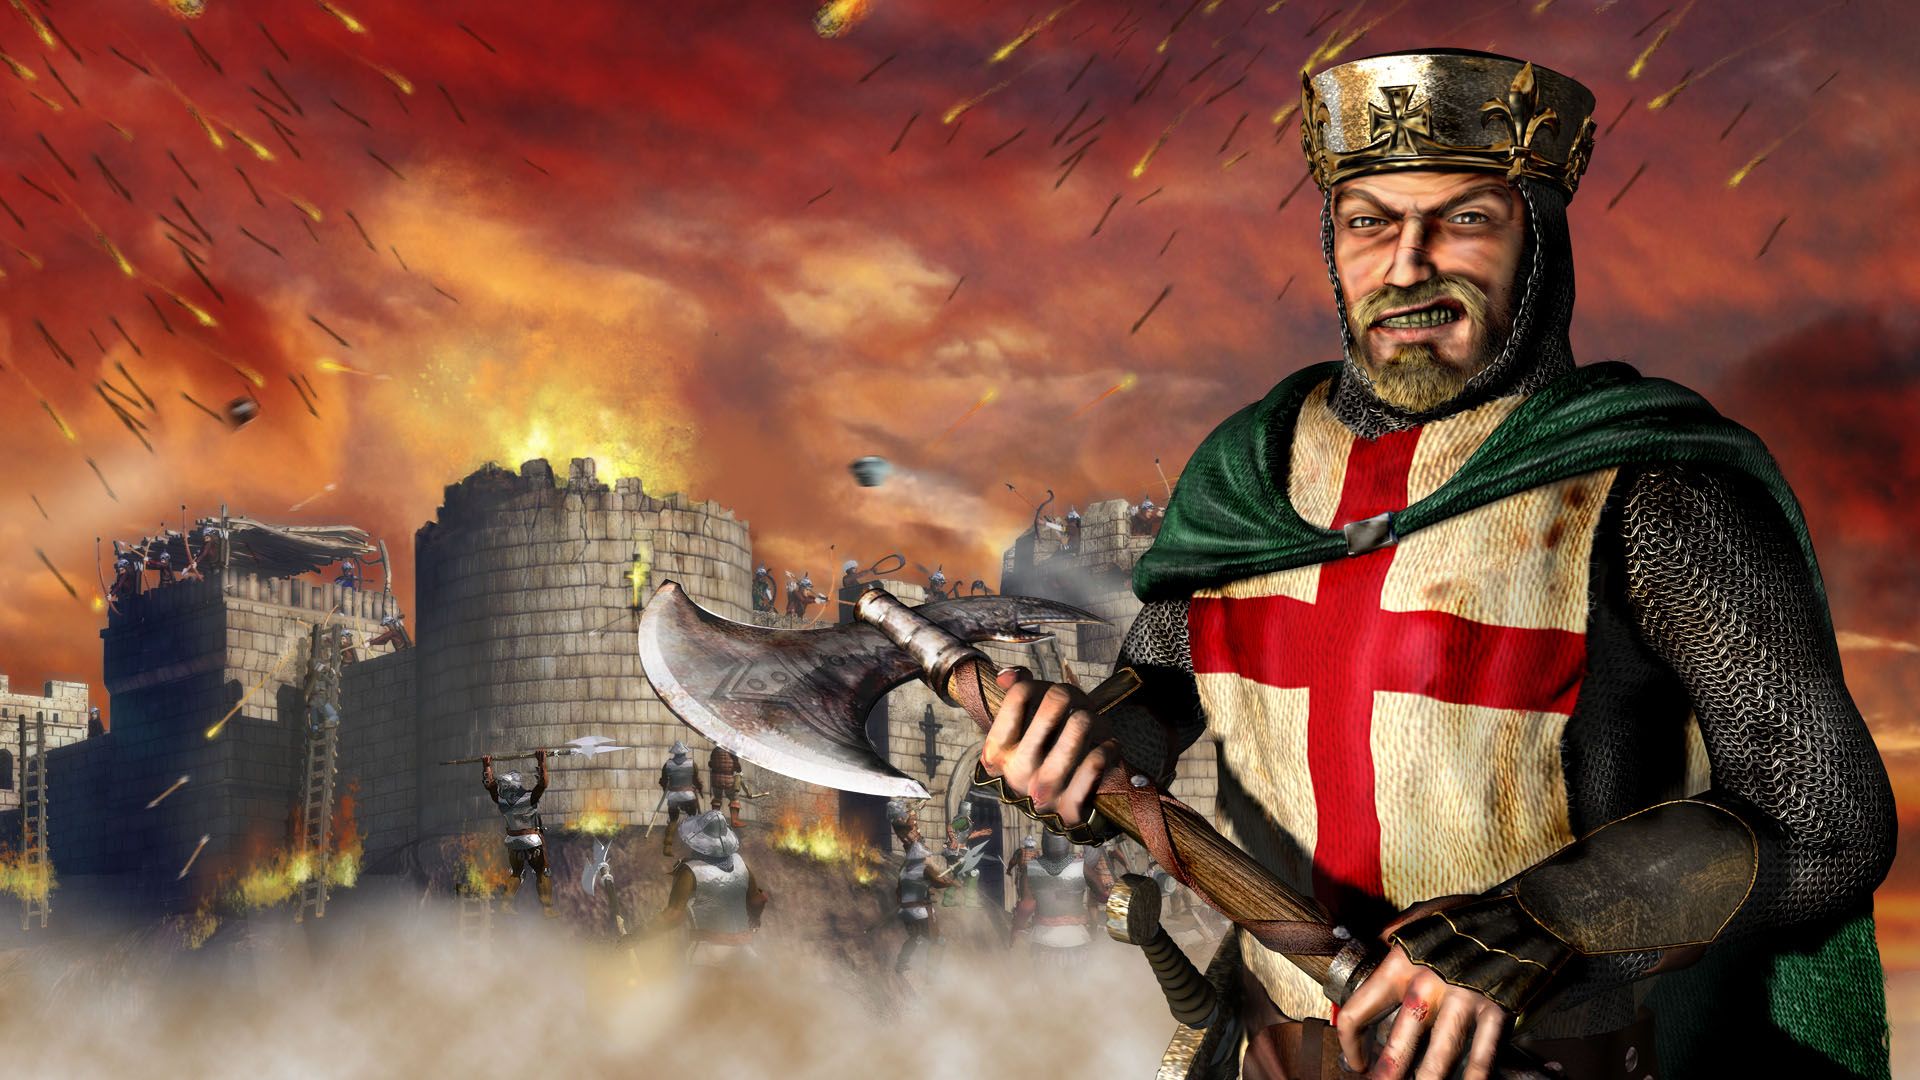 Stronghold Crusader HD Free Download PC Game (Full Version)